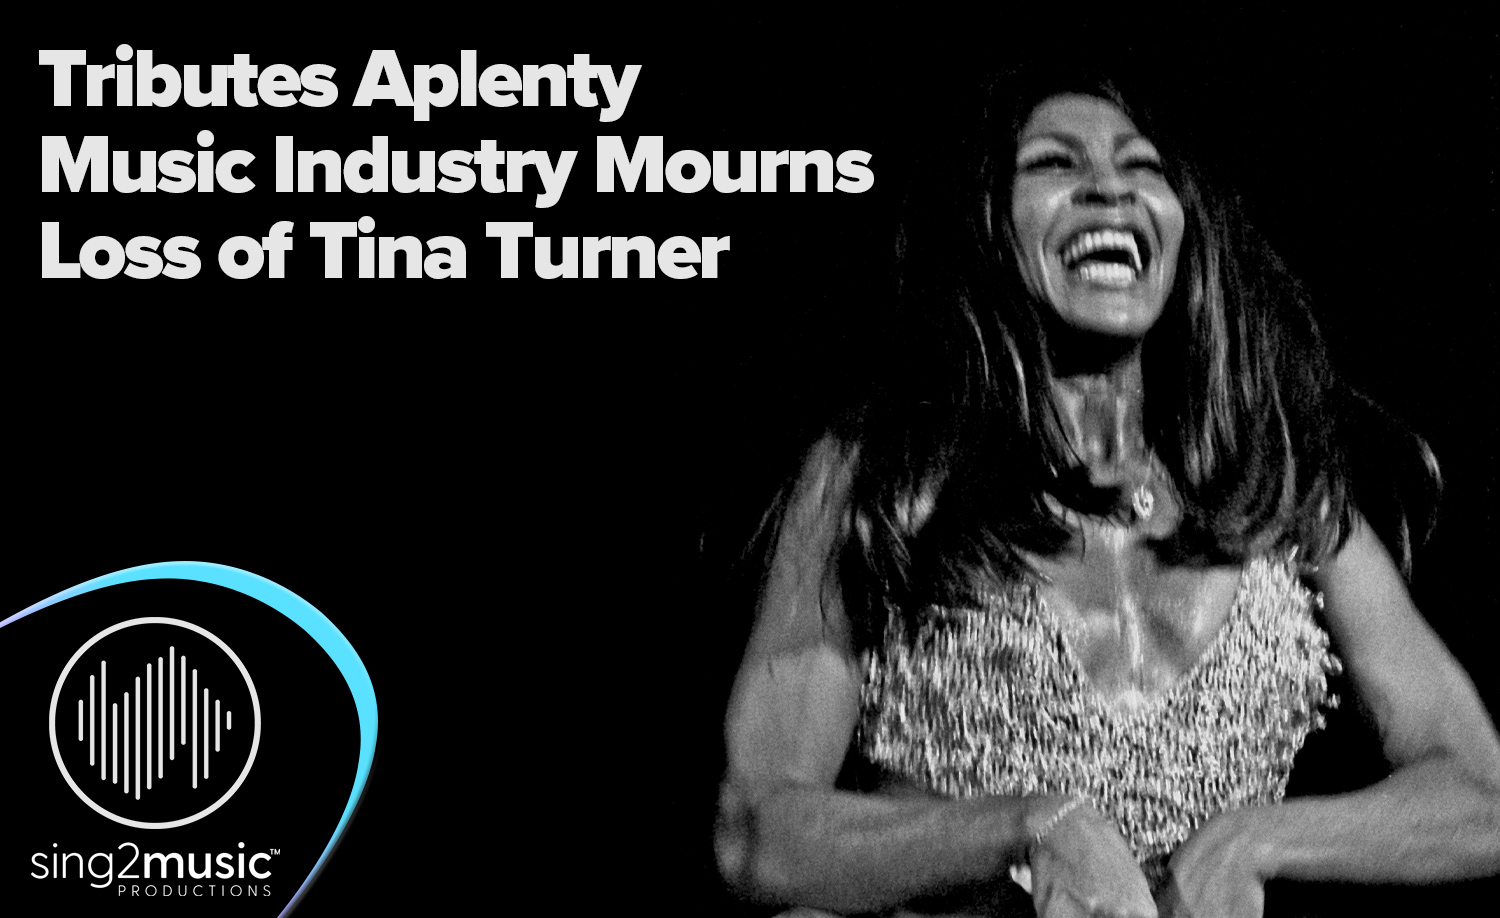 Tributes-Aplenty-Music-Industry-Mourns-Loss-of-Tina-Turner